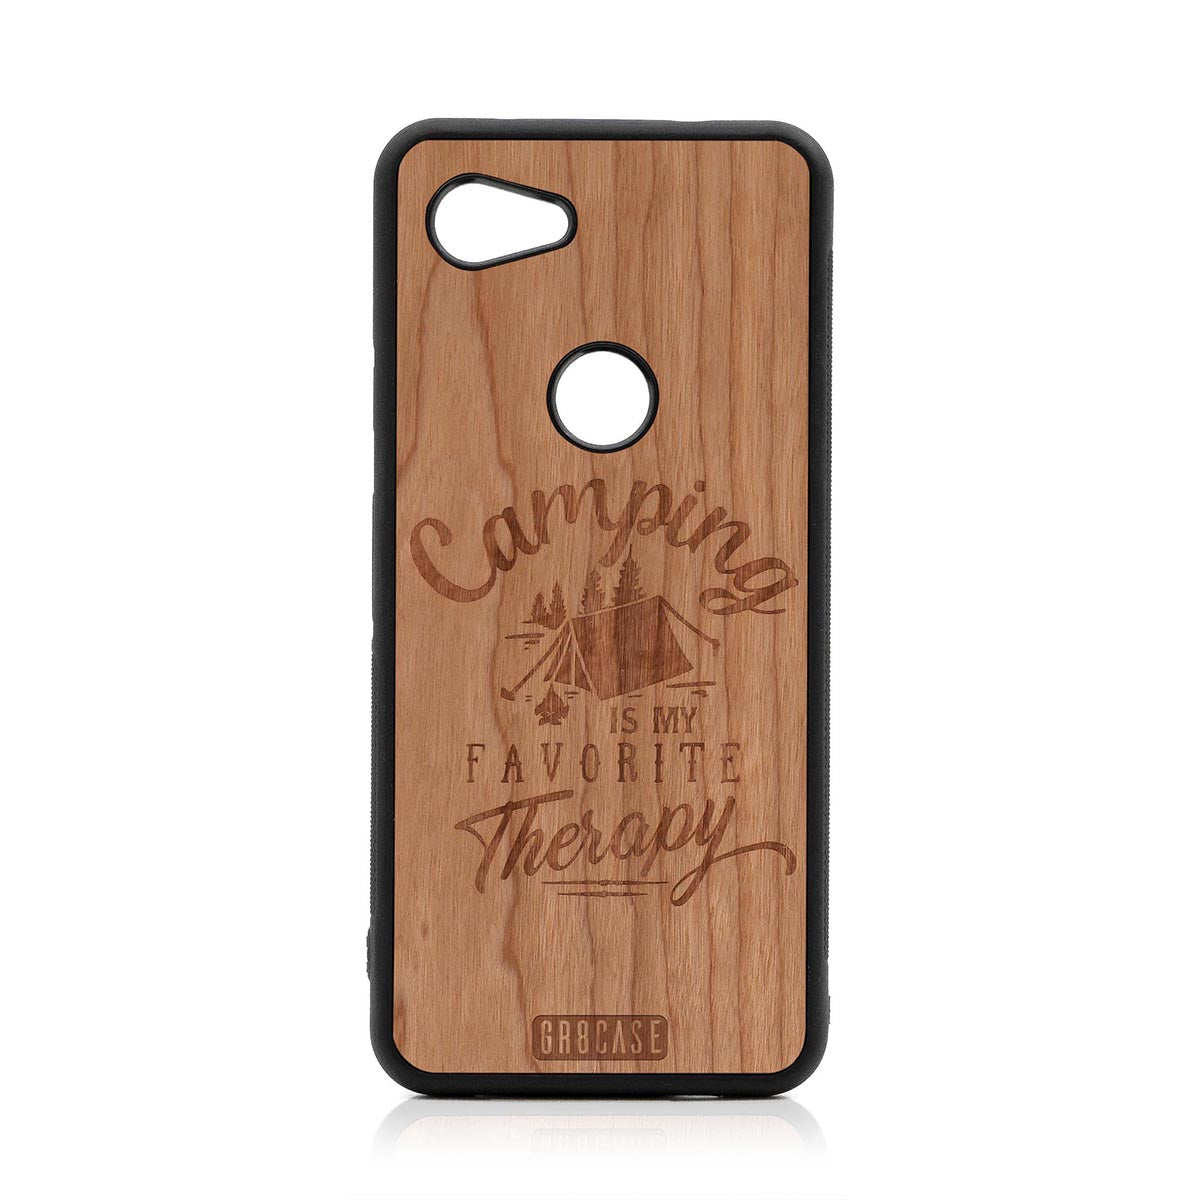 Camping Is My Favorite Therapy Design Wood Case For Google Pixel 3A XL by GR8CASE